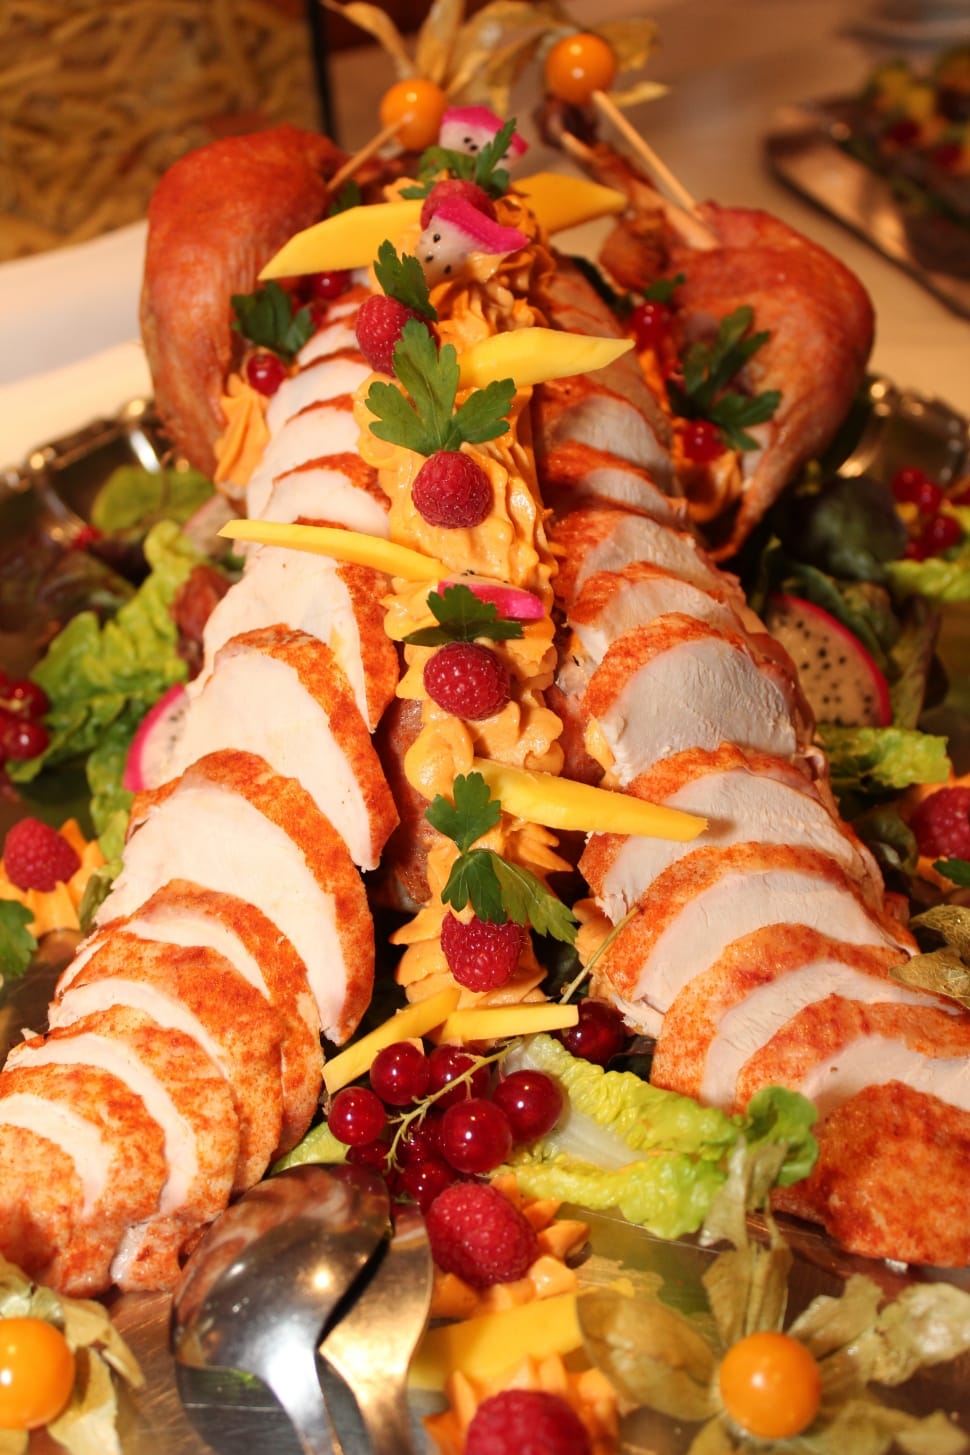 Salad, Turkey, Buffet, Carving, food and drink, food preview